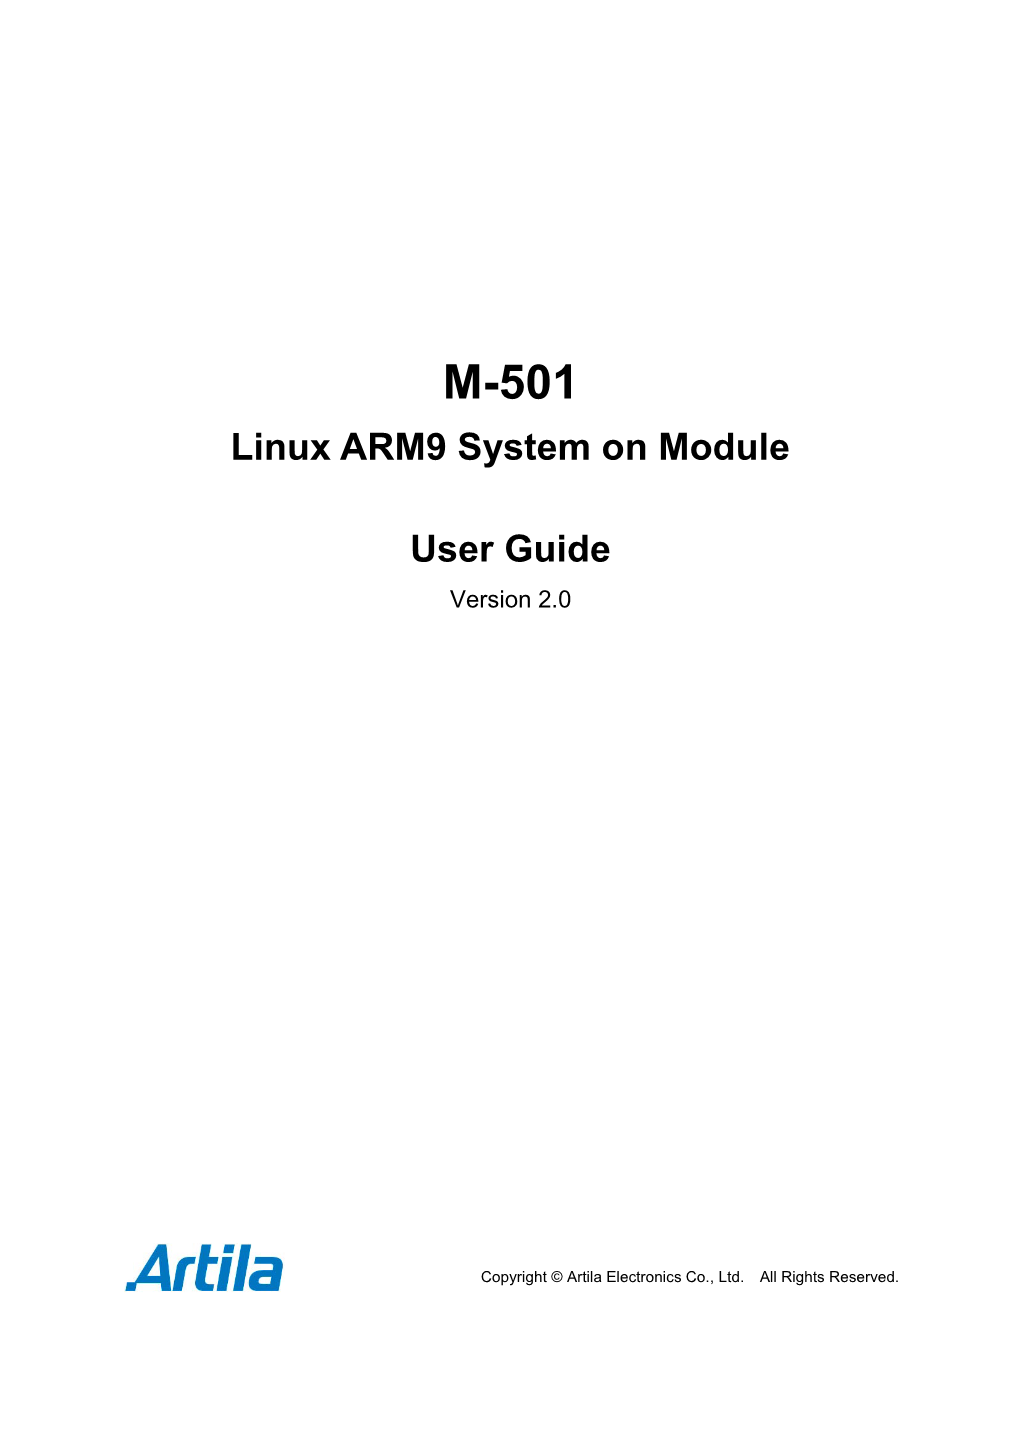 Linux ARM9 System on Module User Guide